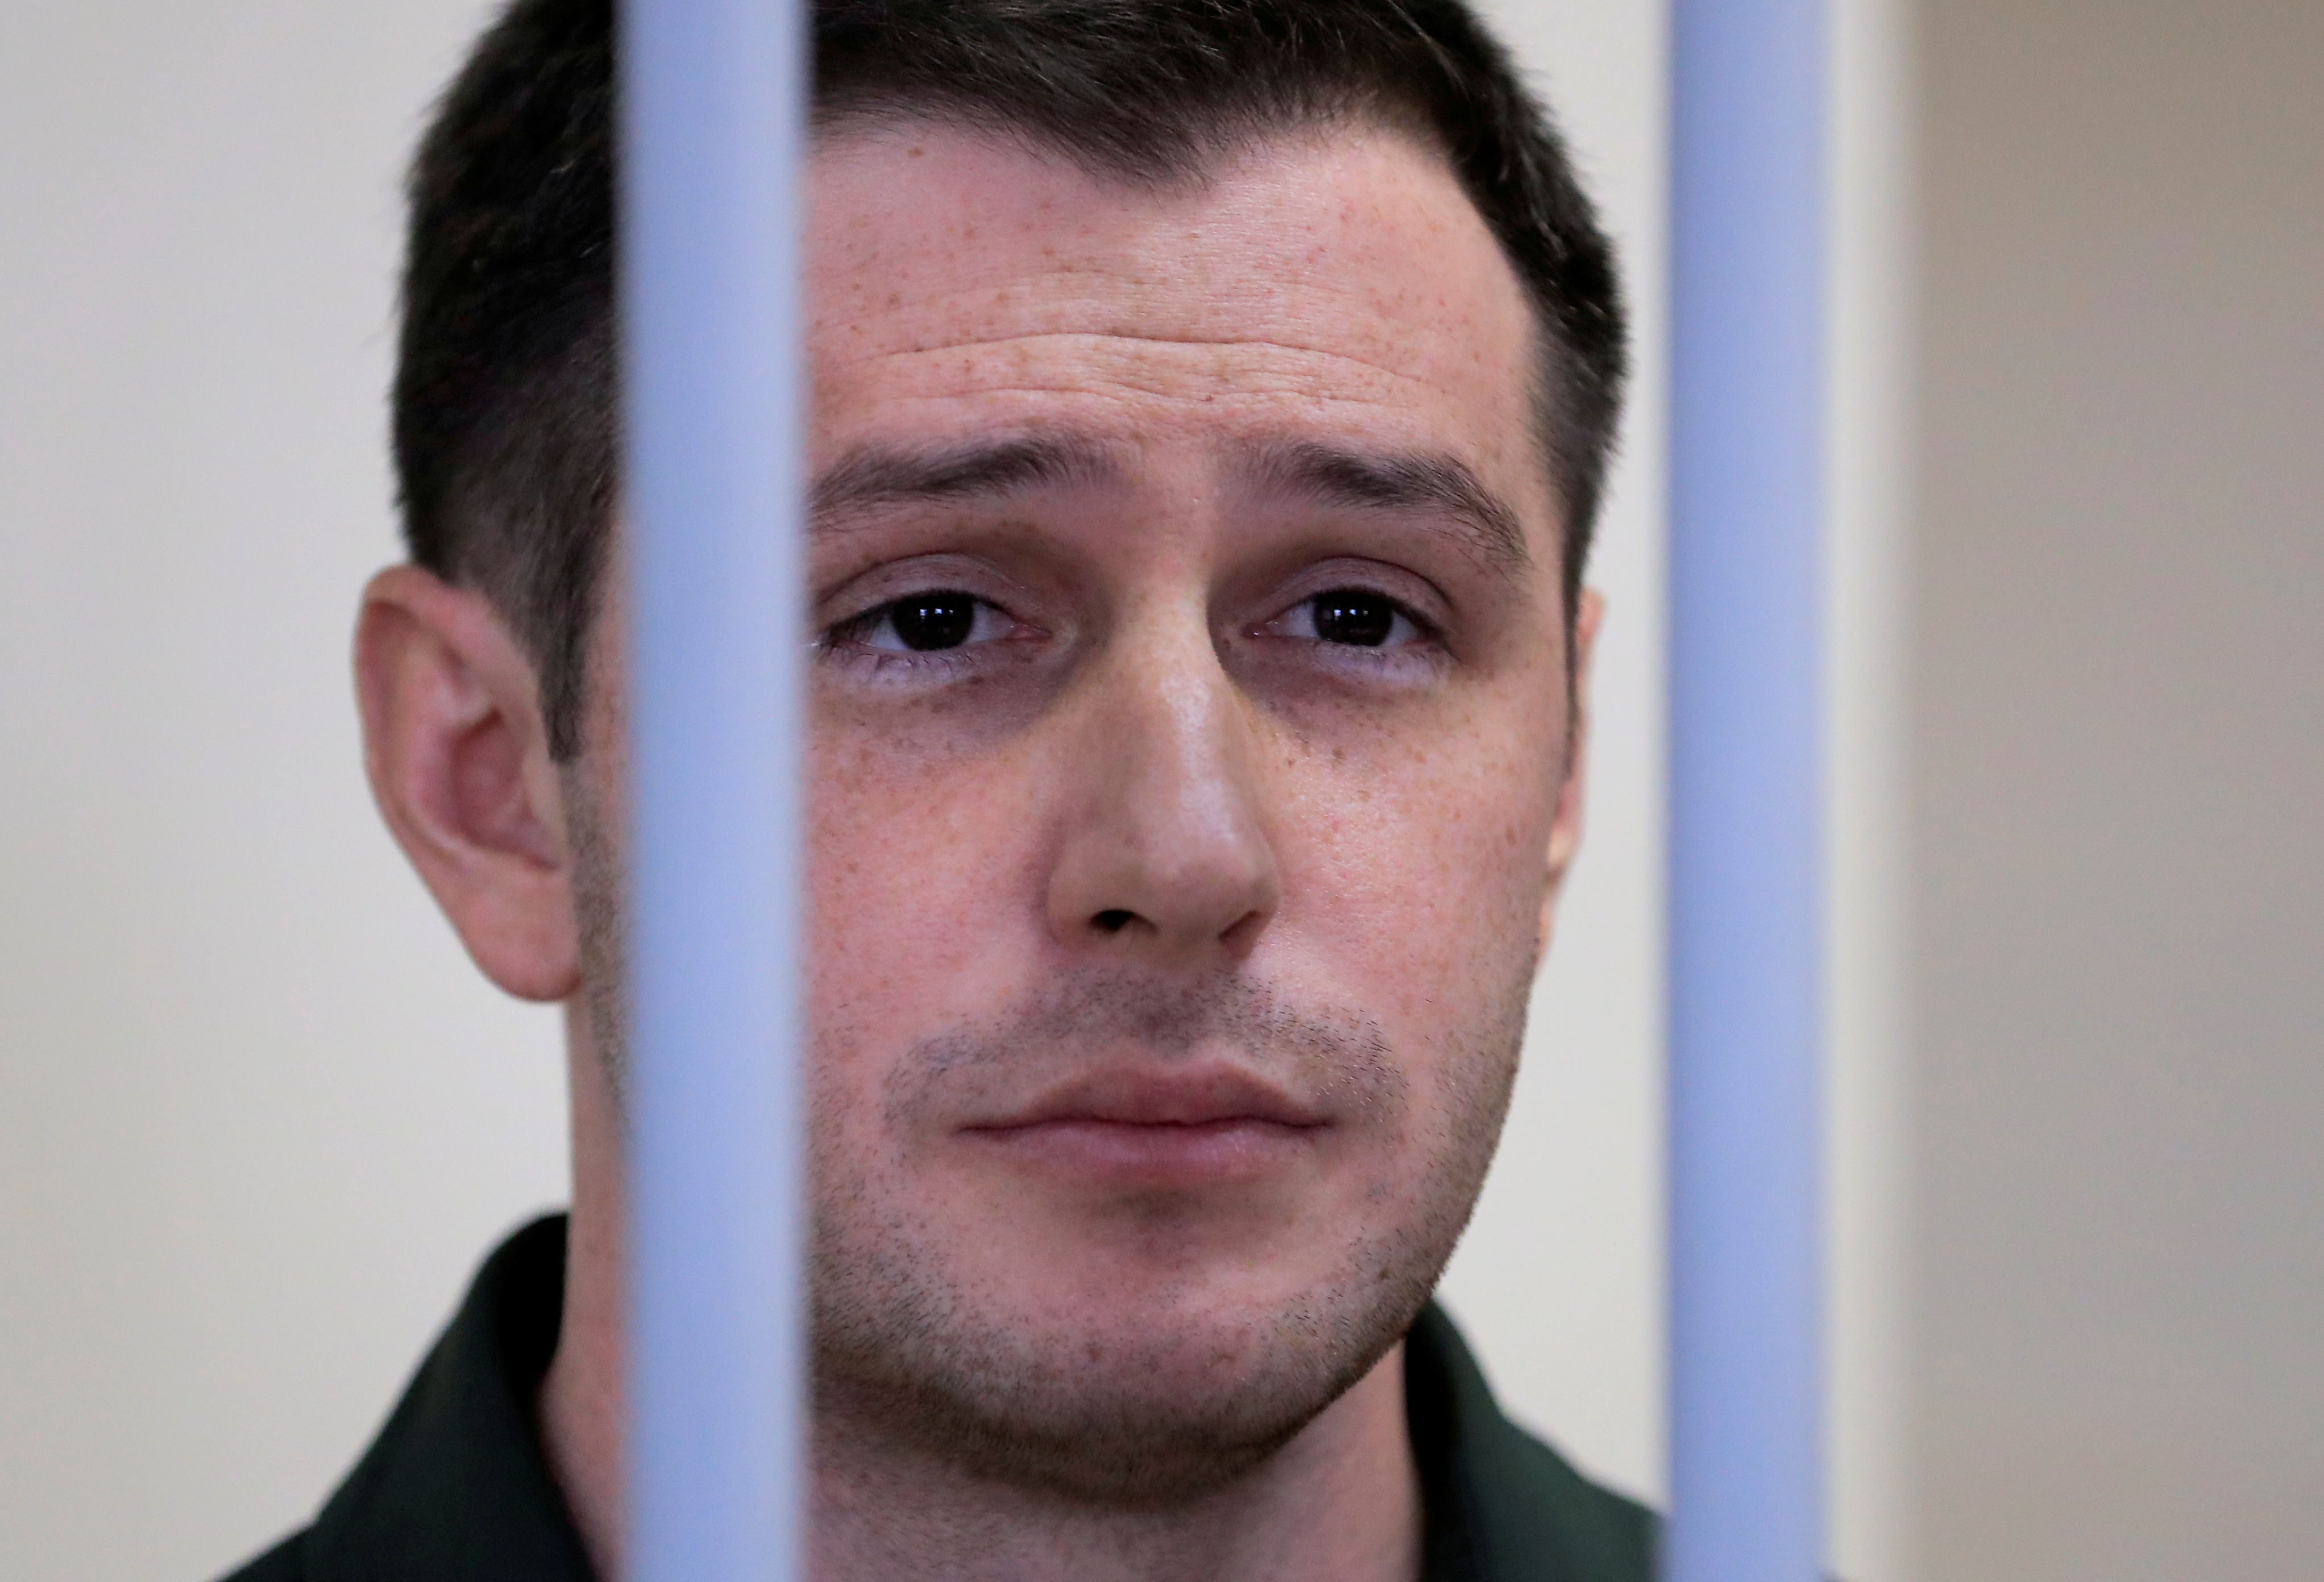 U.S. ex-Marine Trevor Reed, who was detained in 2019 and accused of assaulting police officers, stands inside a defendants' cage during a court hearing in Moscow, Russia March 11, 2020. REUTERS/Tatyana Makeyeva/File Photo